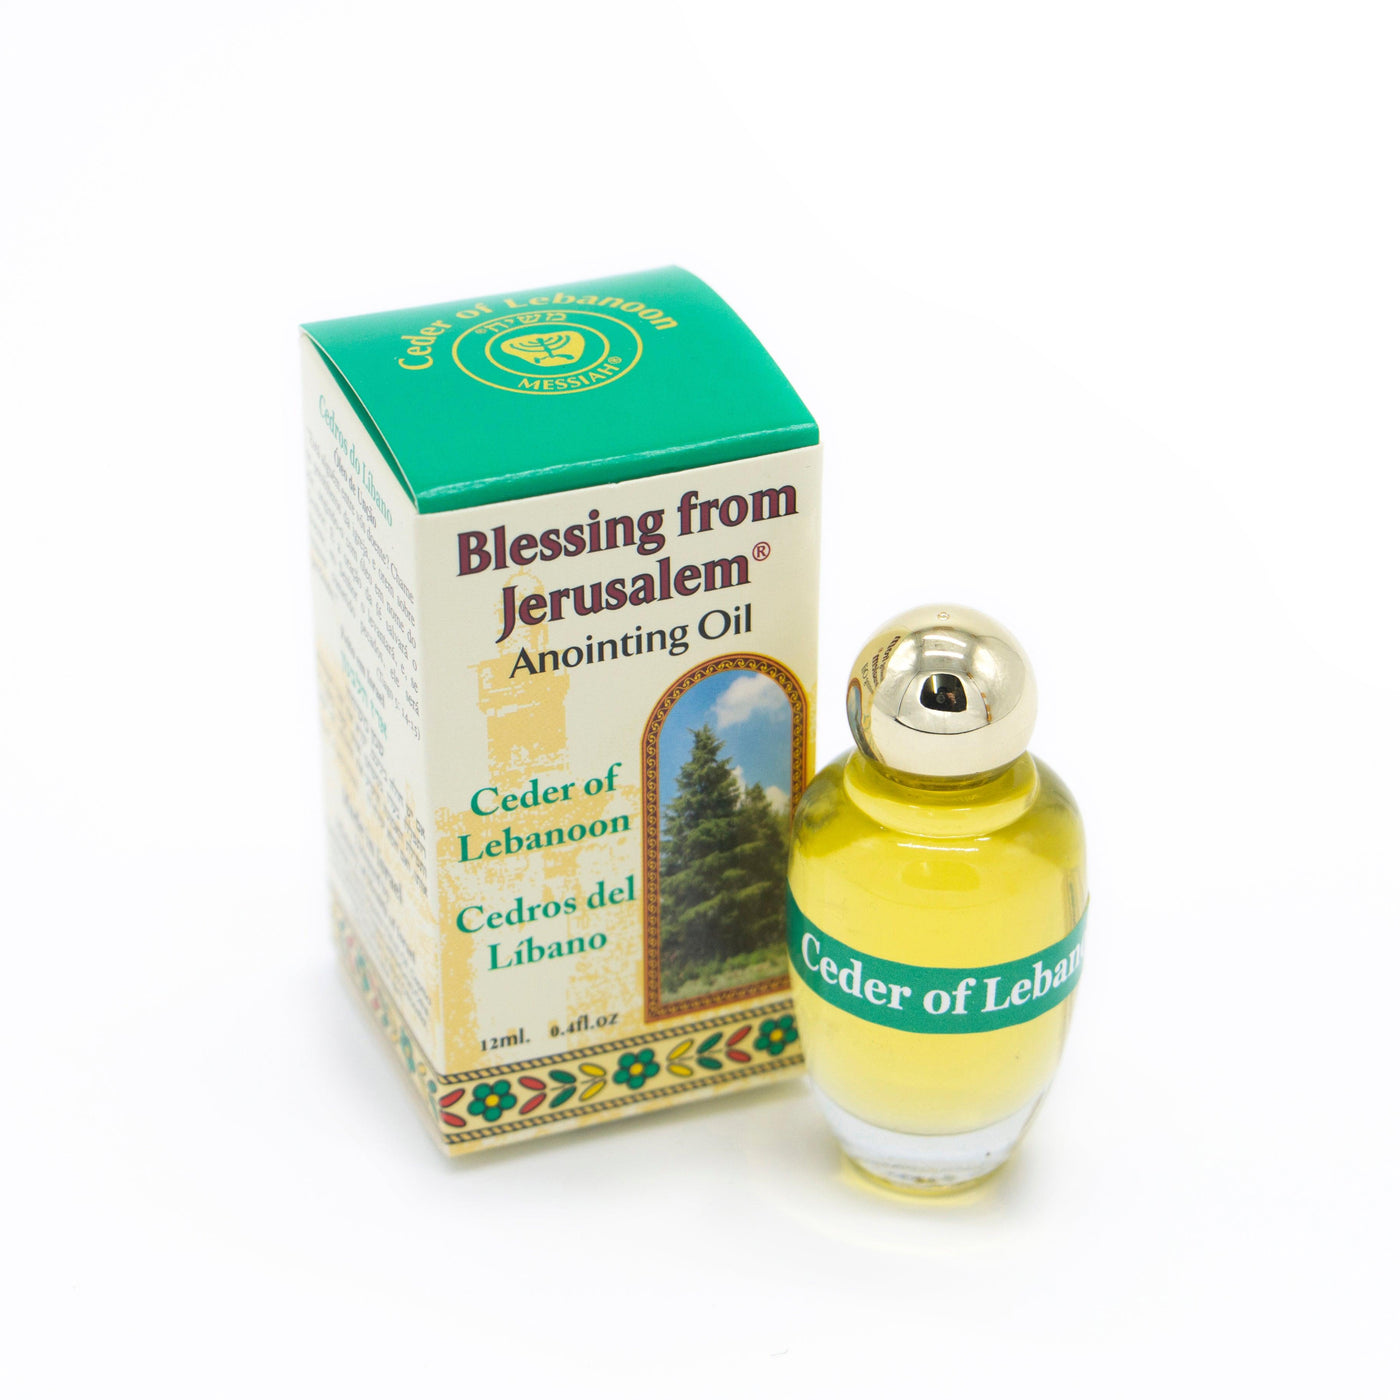 35x Anointing Oil 12ml - 0.4oz From Holyland Jerusalem - Spring Nahal